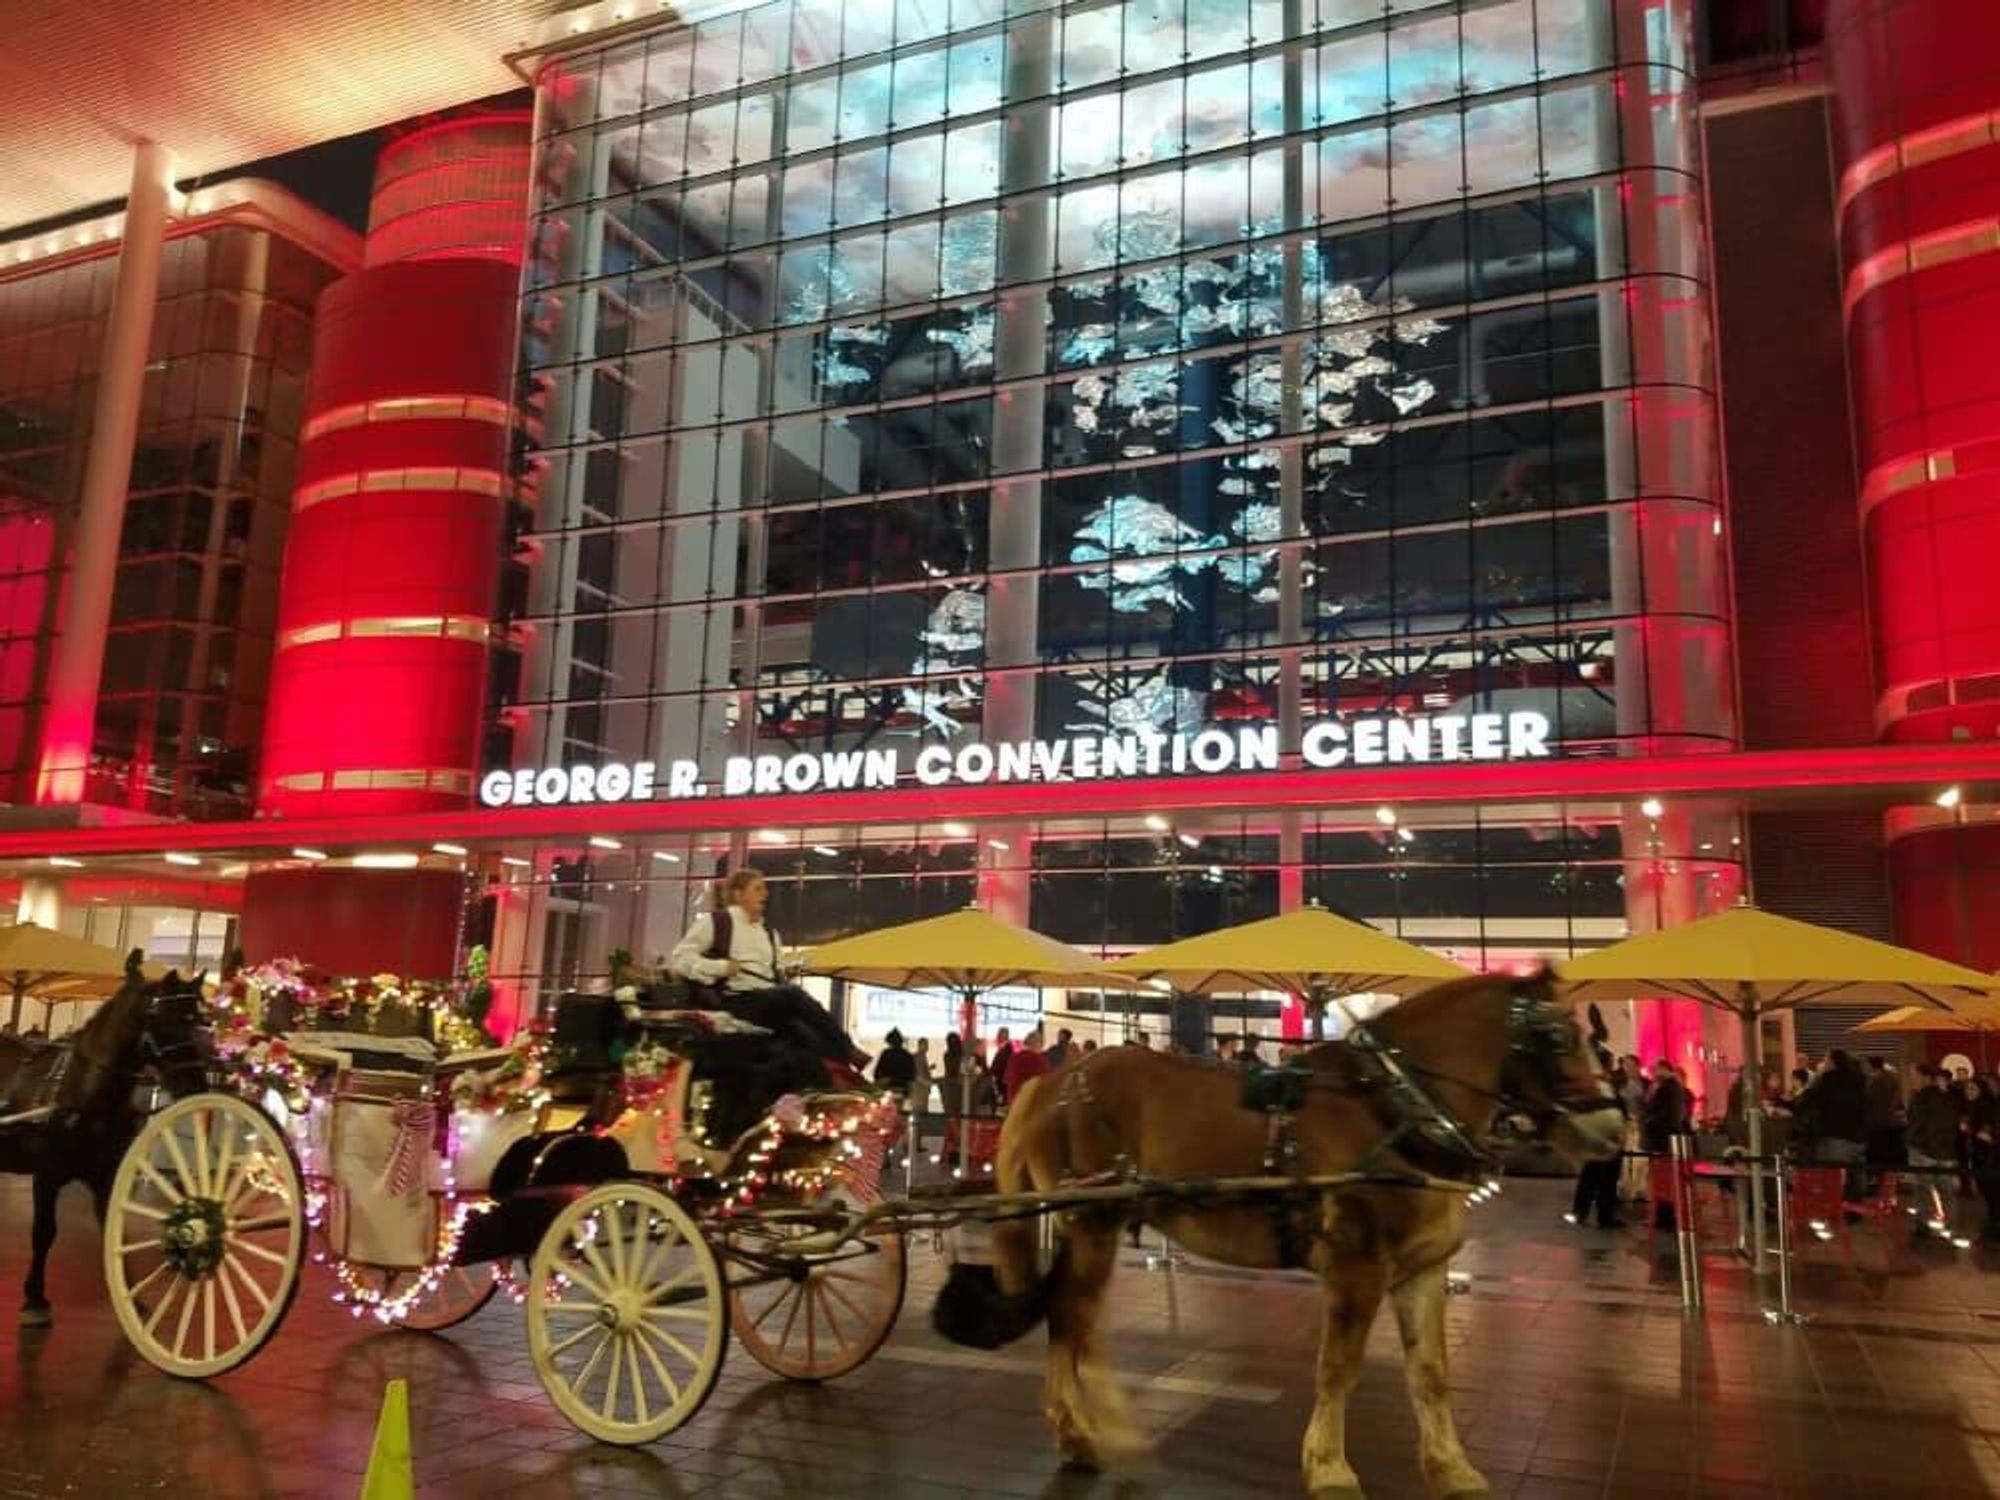 Horse drawn carriage in front of George R Brown Convention Center for Super Bowl kickoff